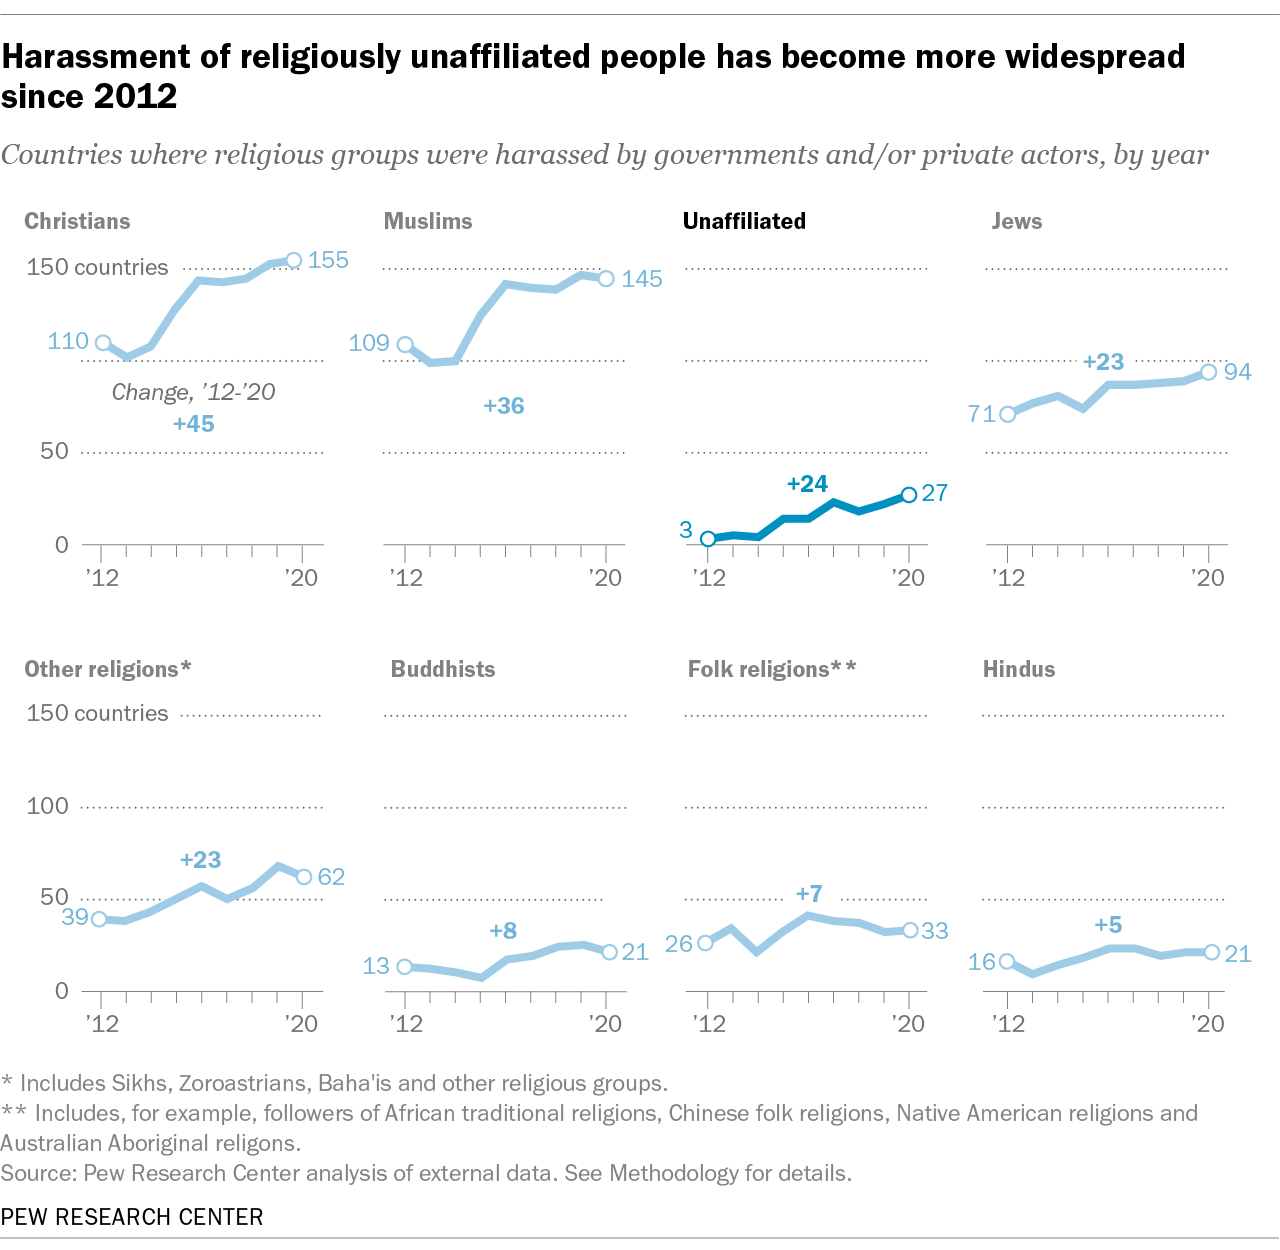 A chart showing that harassment of religiously unaffiliated people has become more widespread across the globe since 2012